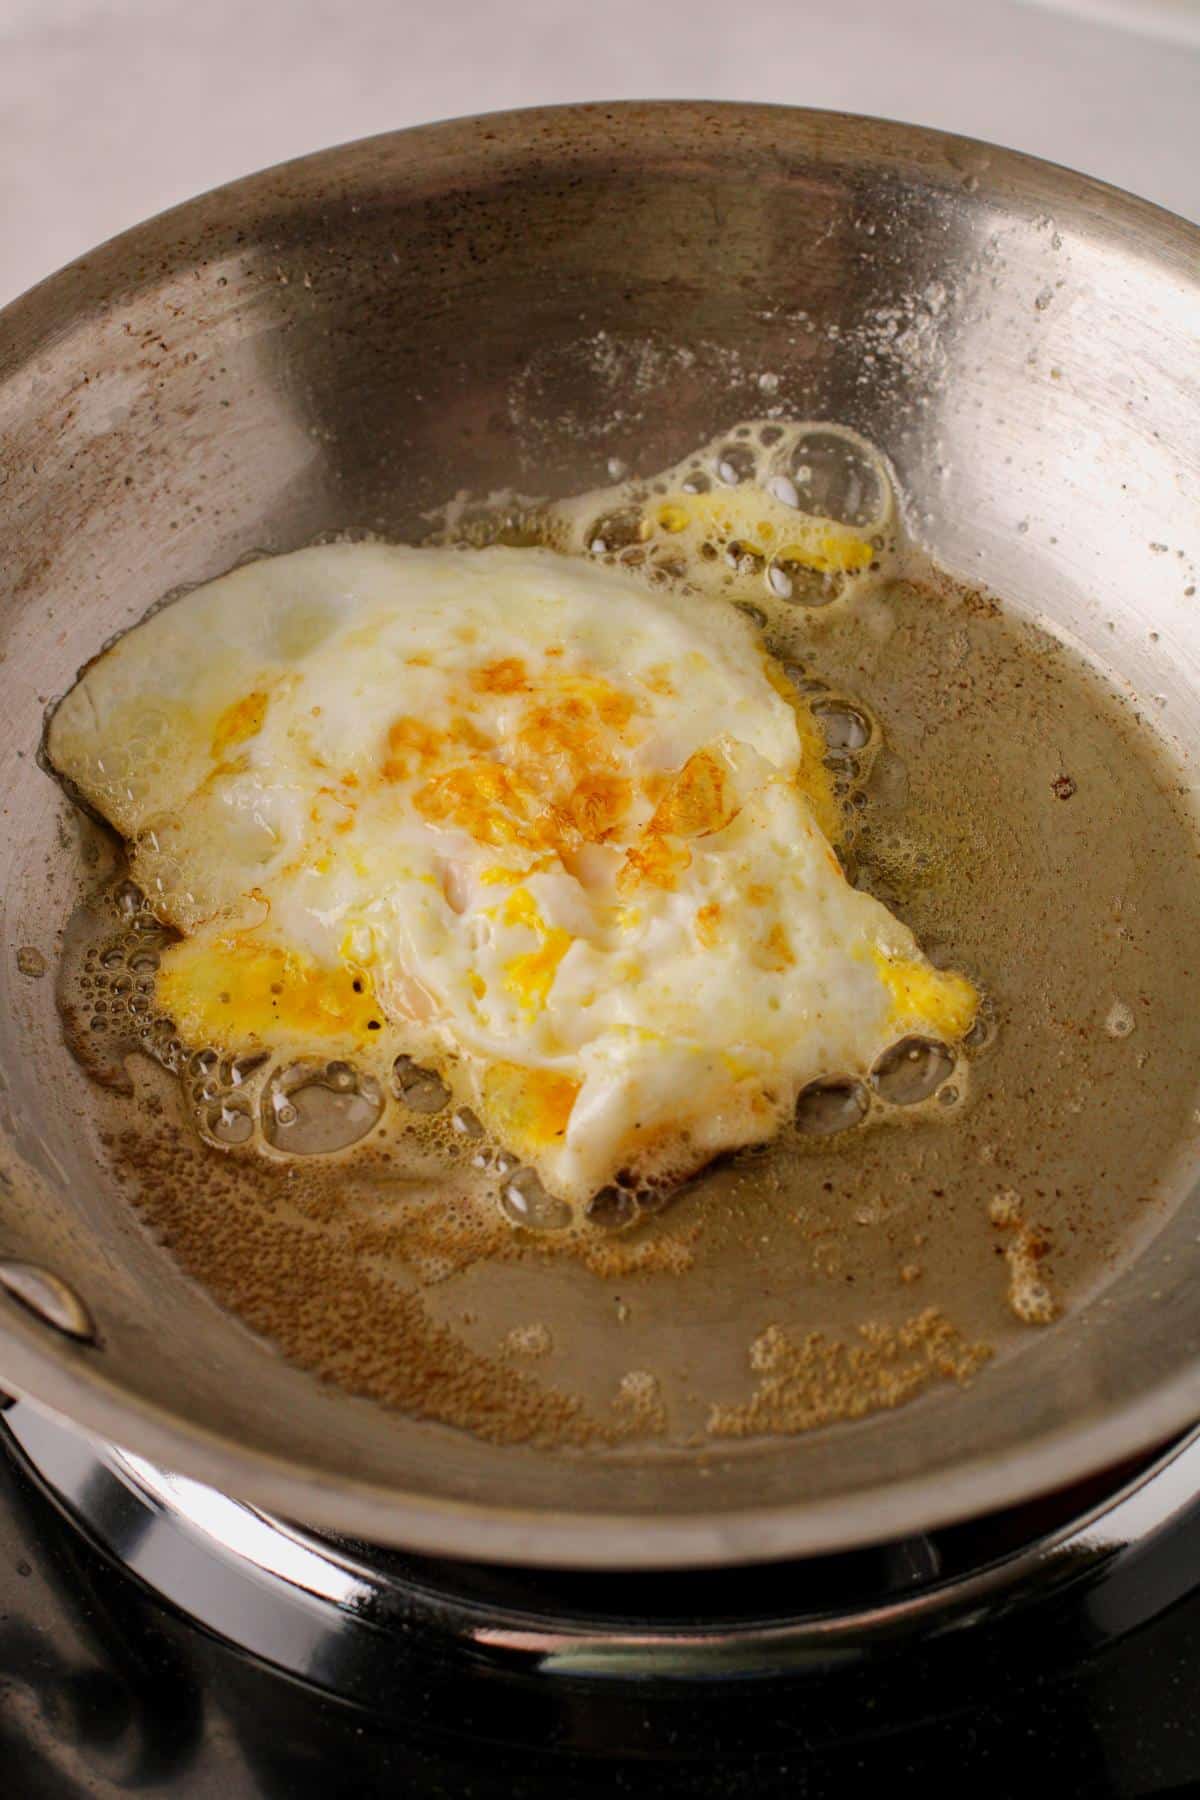 Egg flipped with top side cooked.